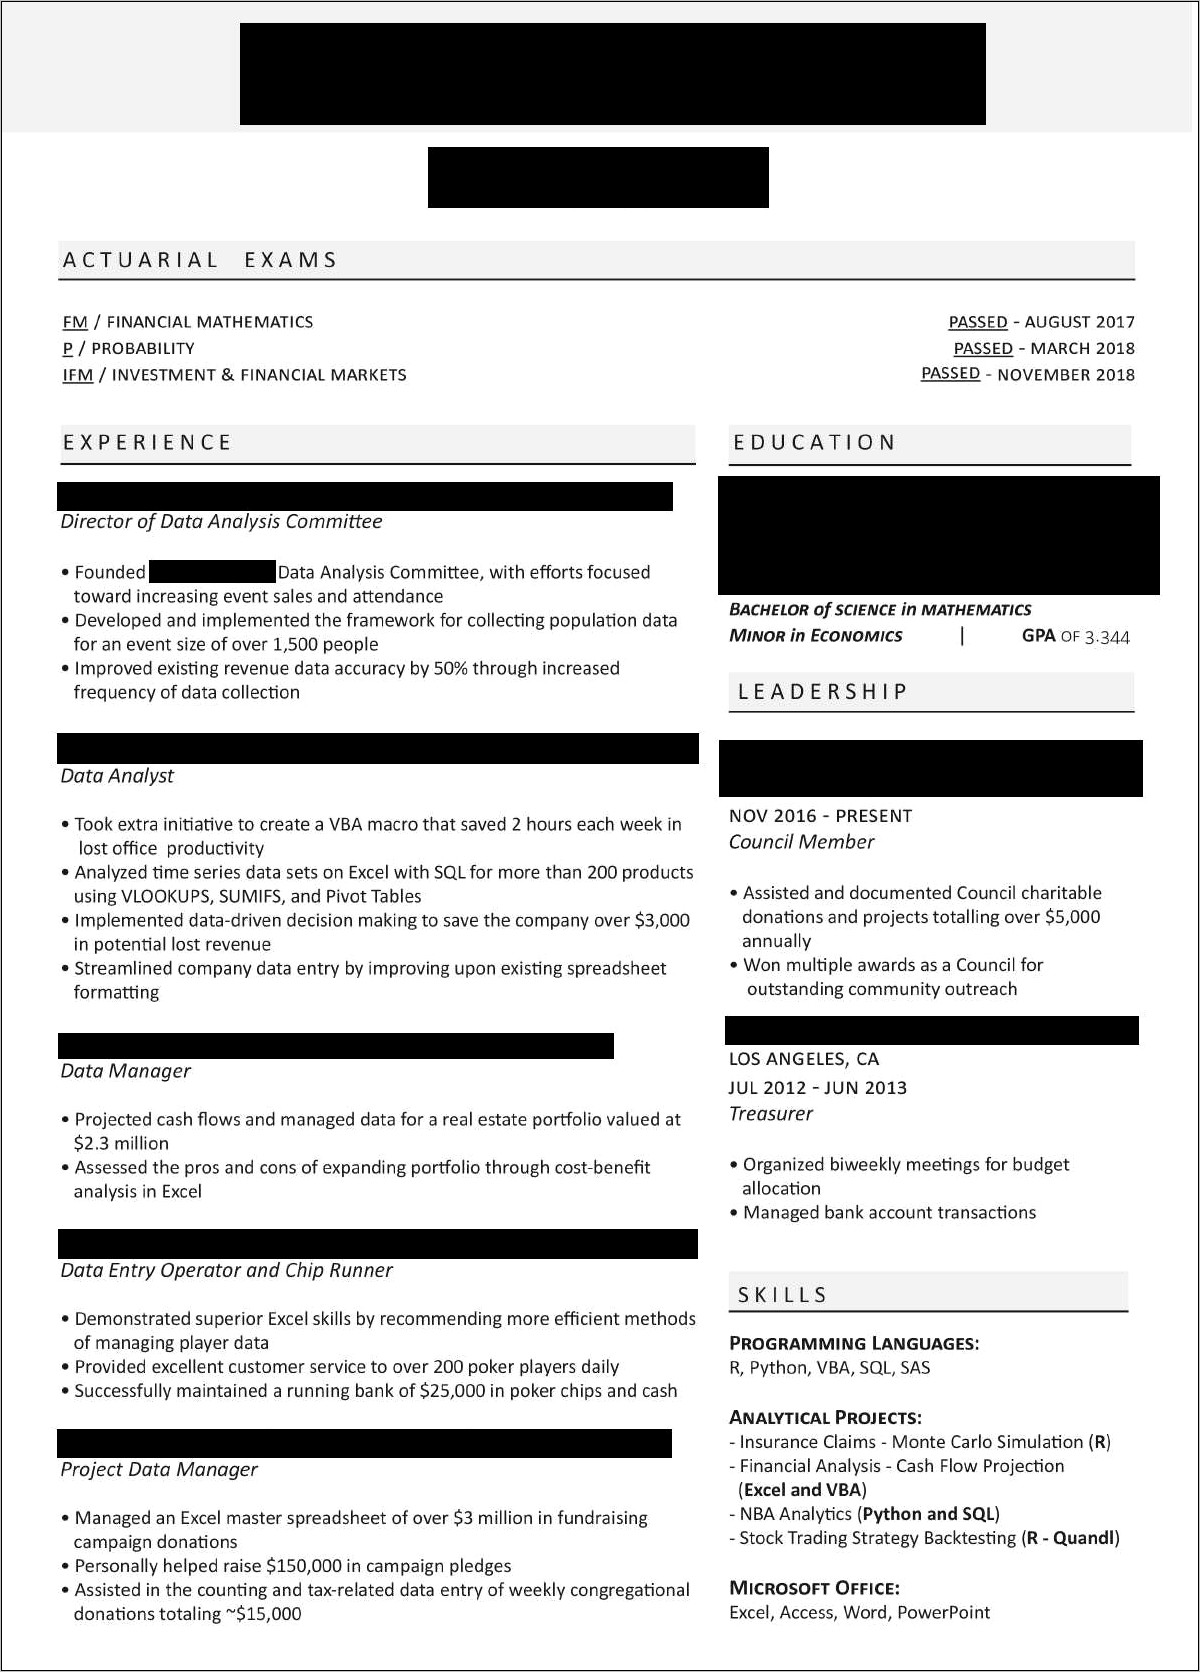 Sample Actuary Resume Entry Level